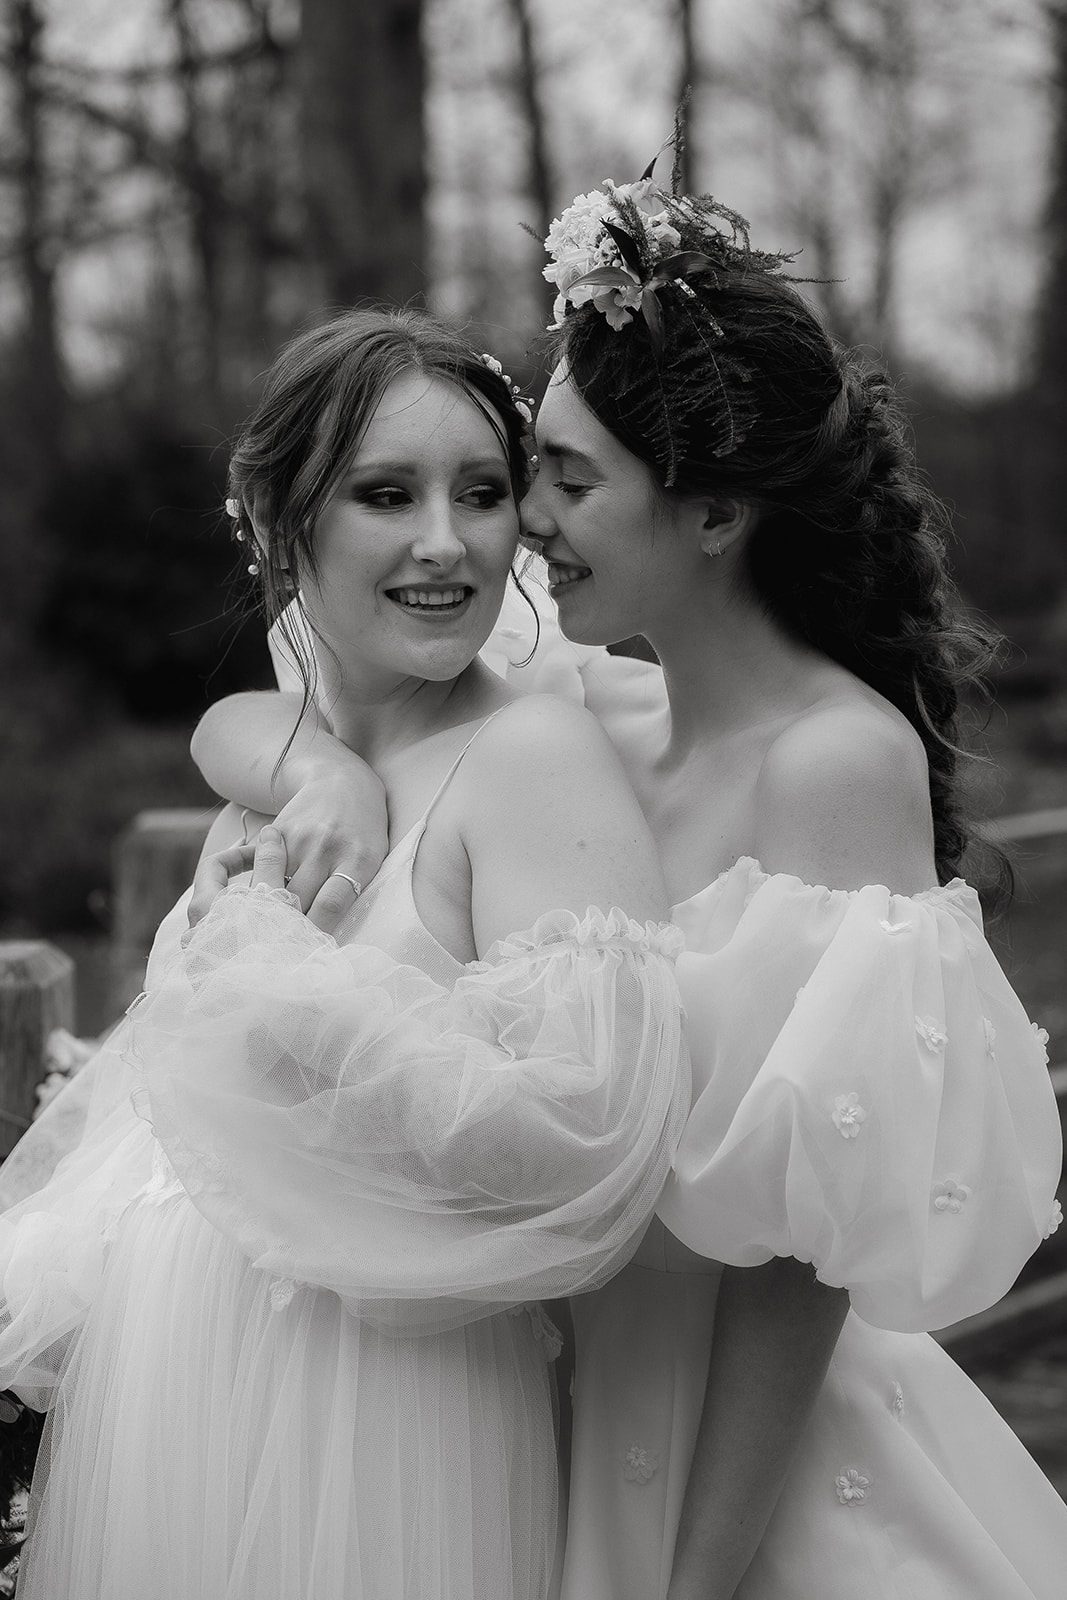 two brides snuggle together on the grounds of Mapledurham House wedding venue in the spring sunshine